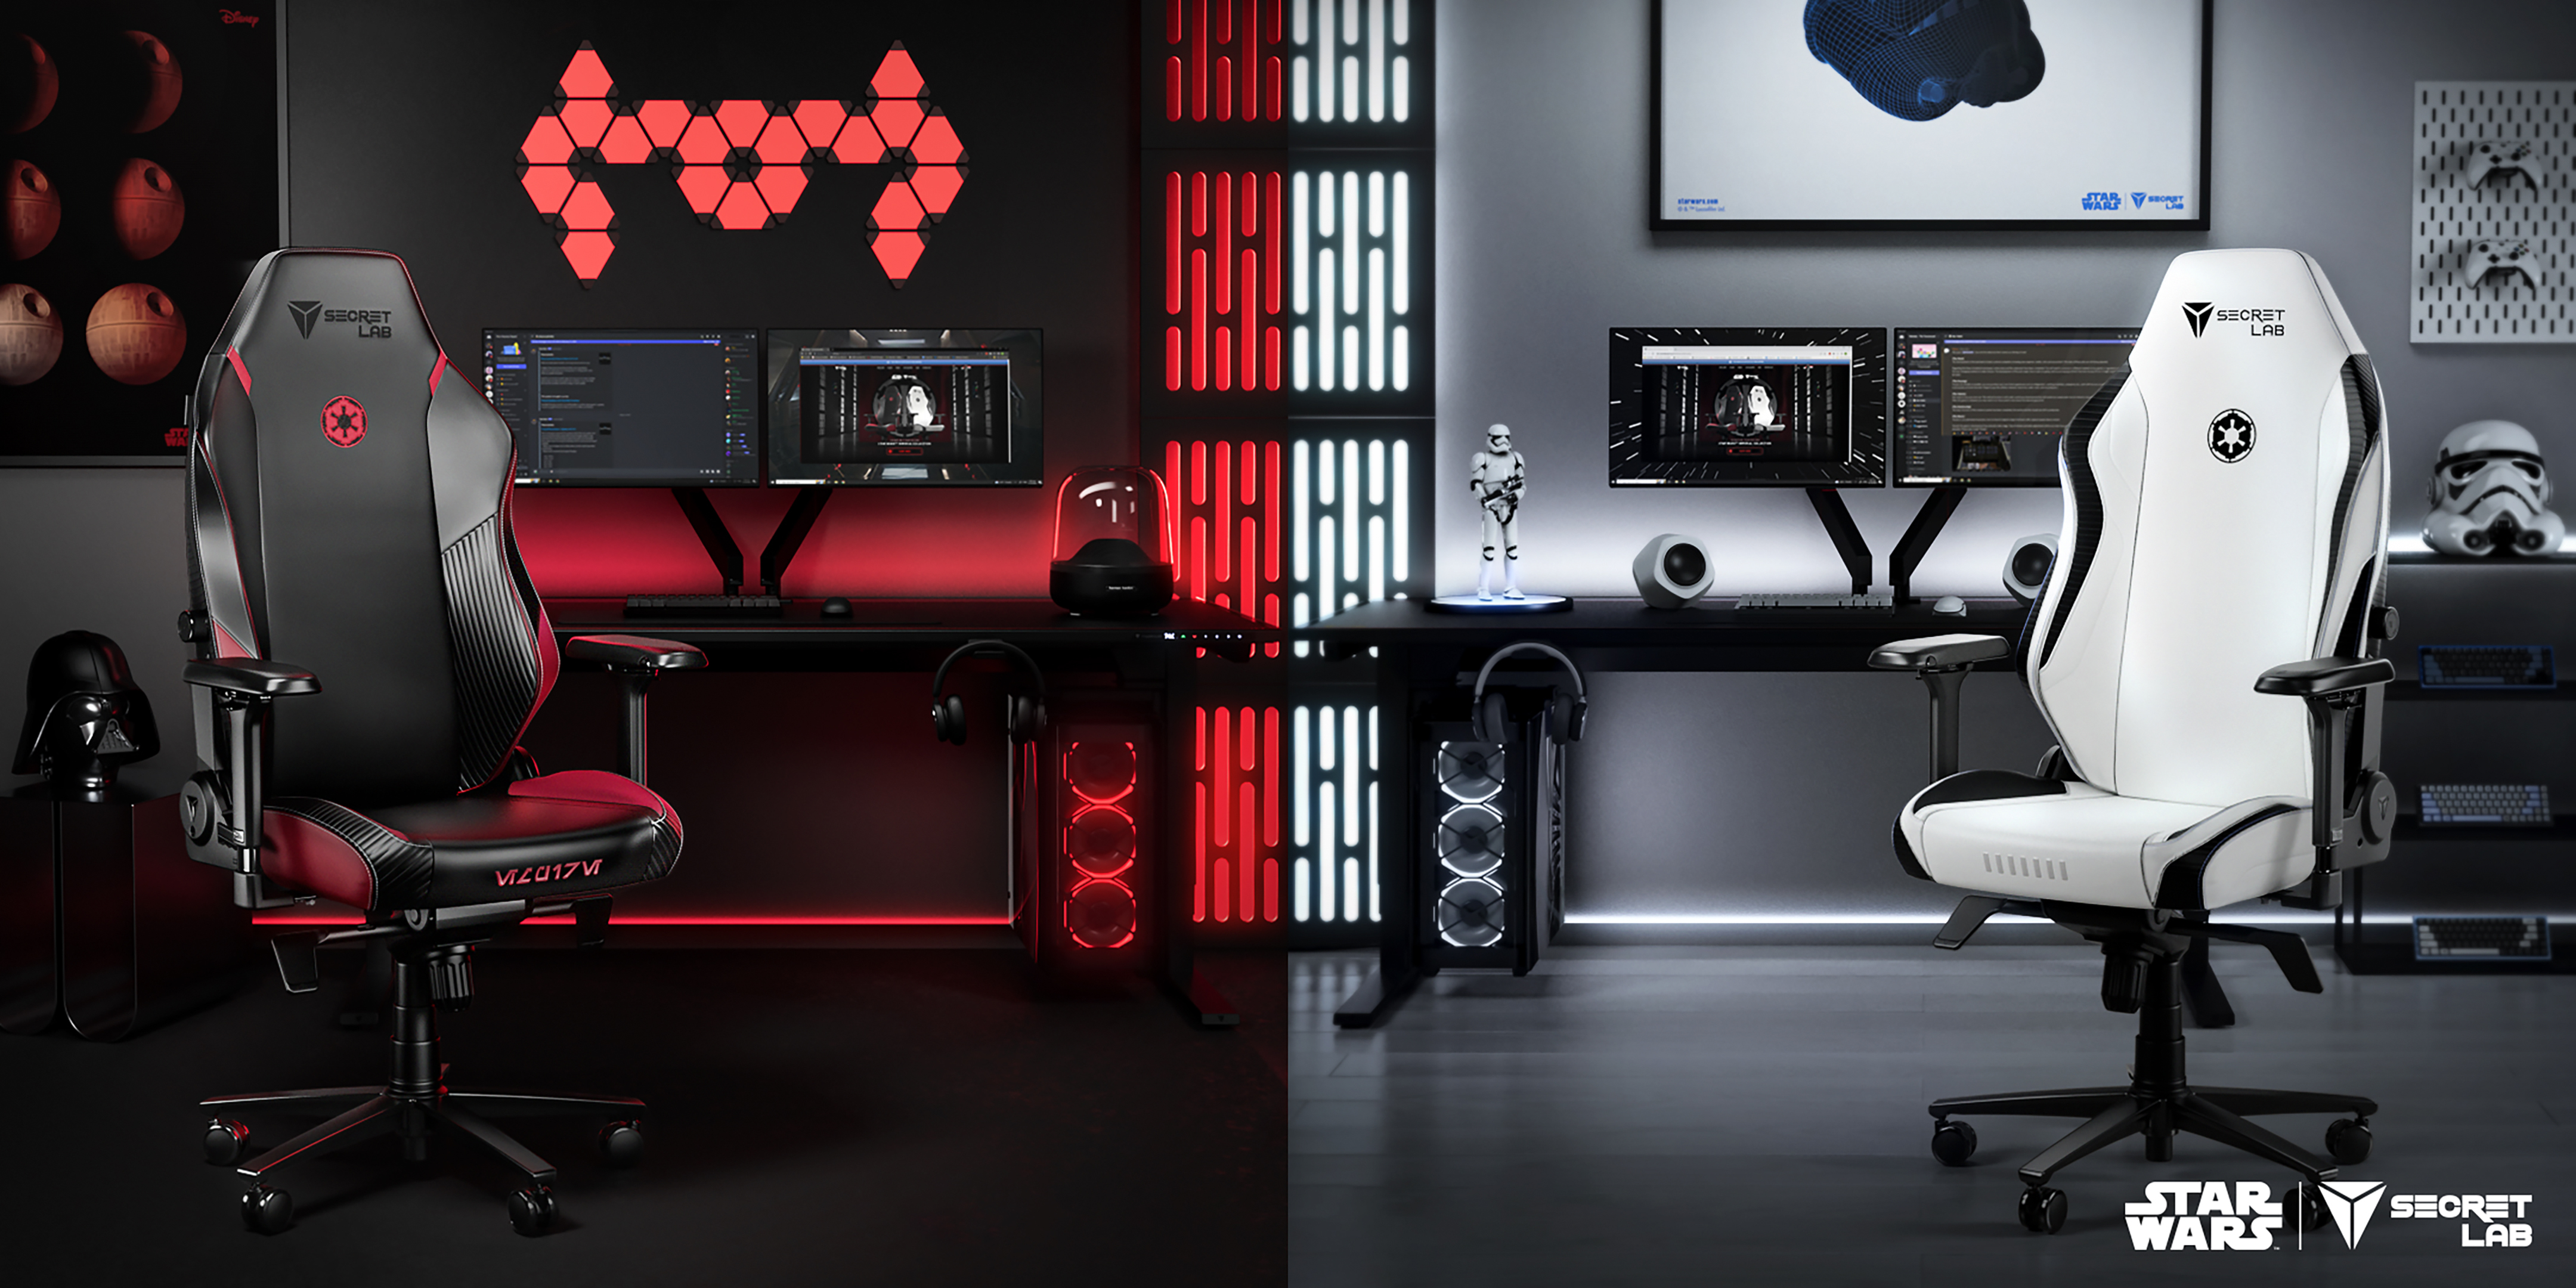 Two Star Wars gaming chairs, one white and one black, with color-matching backgrounds.